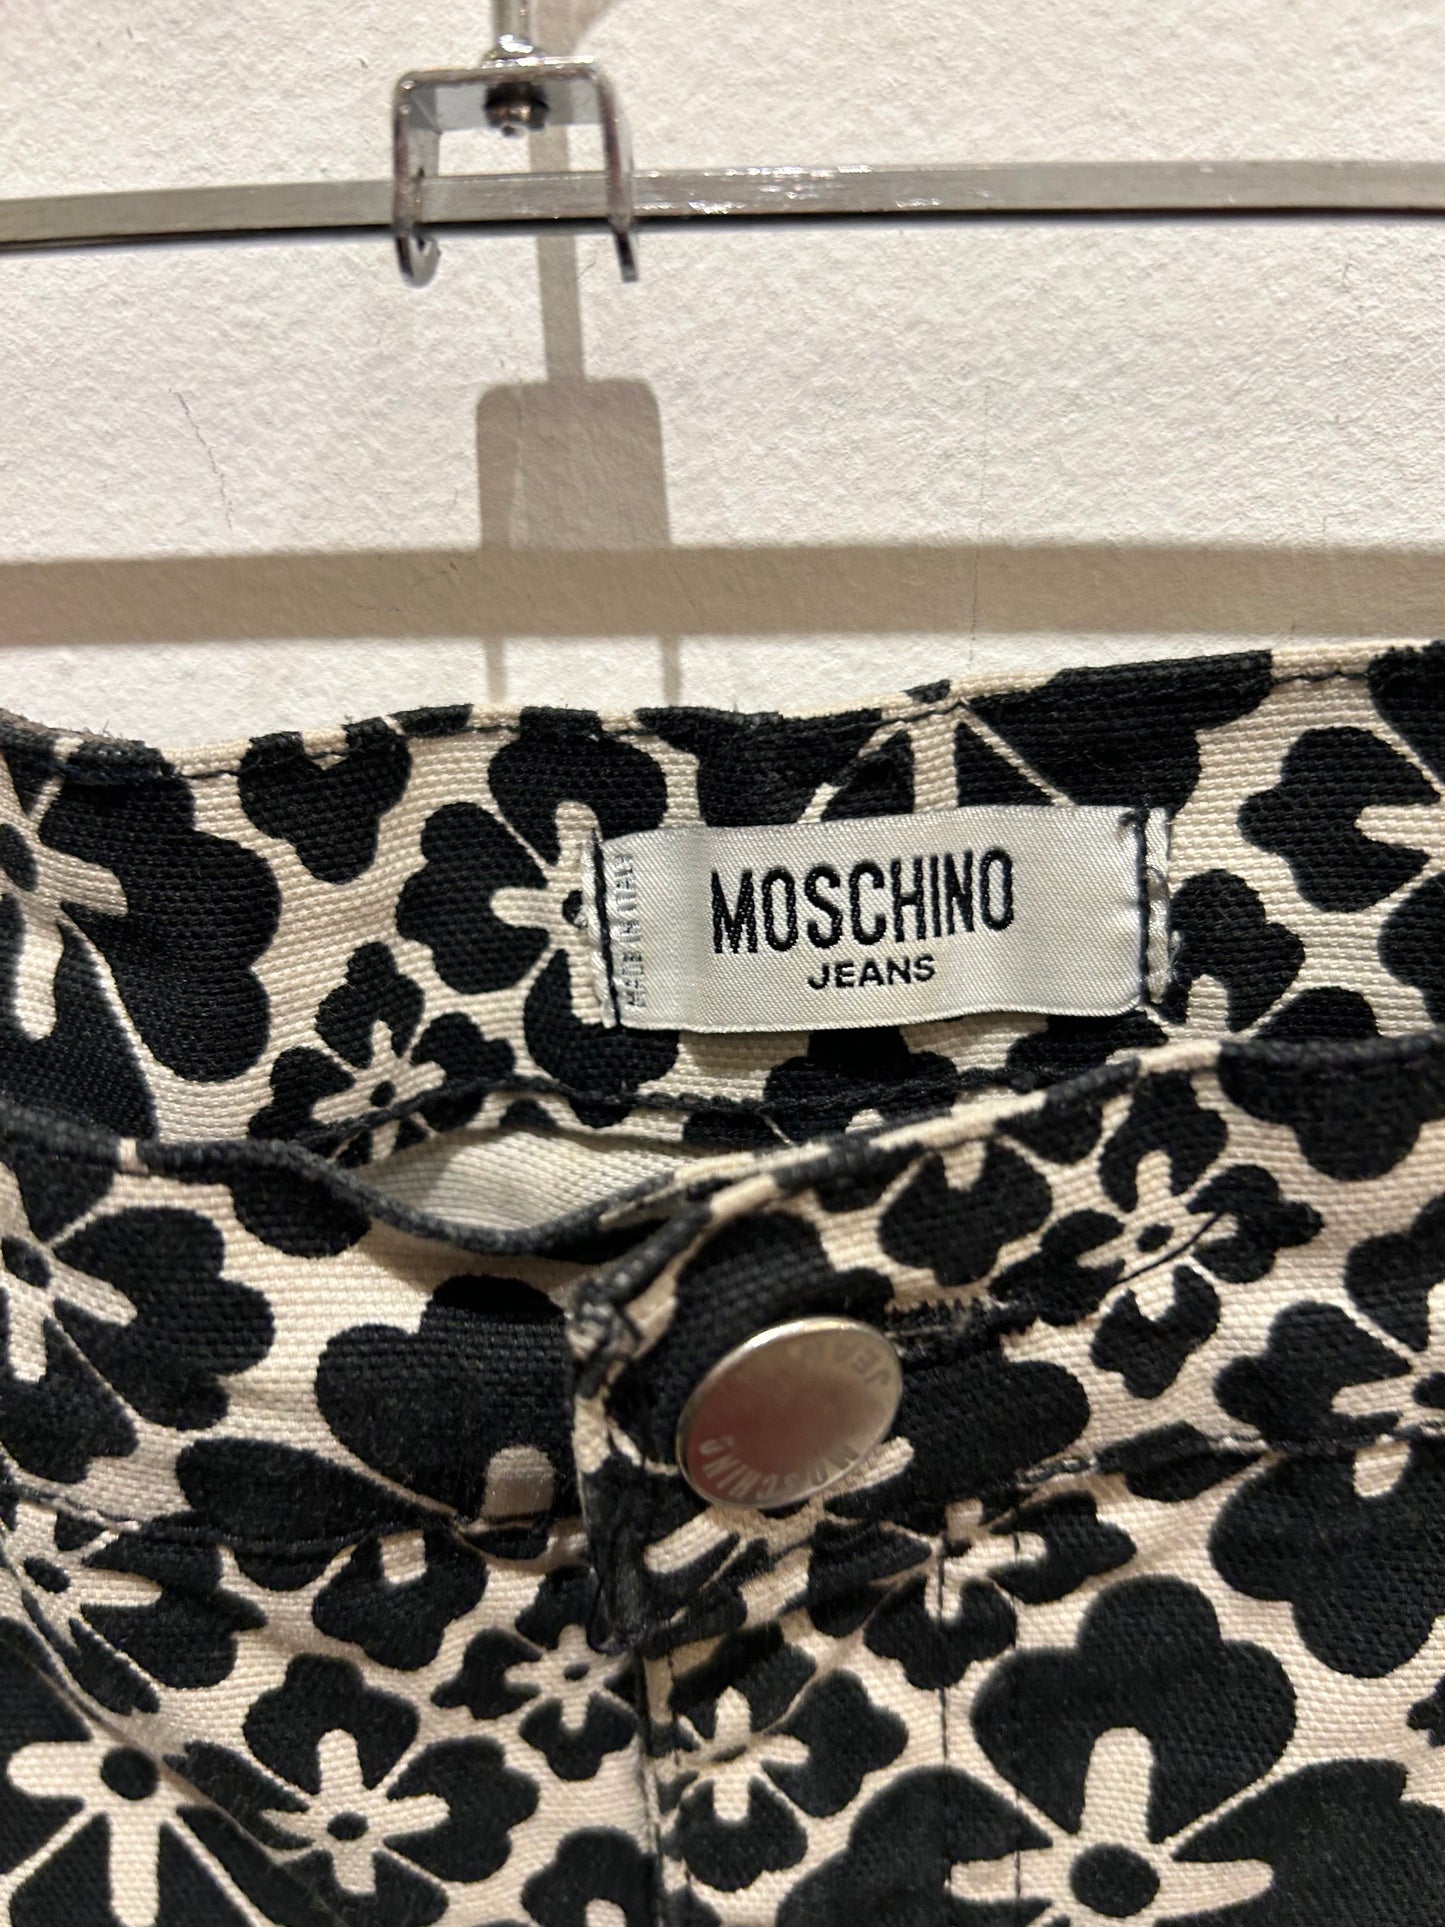 MOSCHINO jeans flower patterned pants